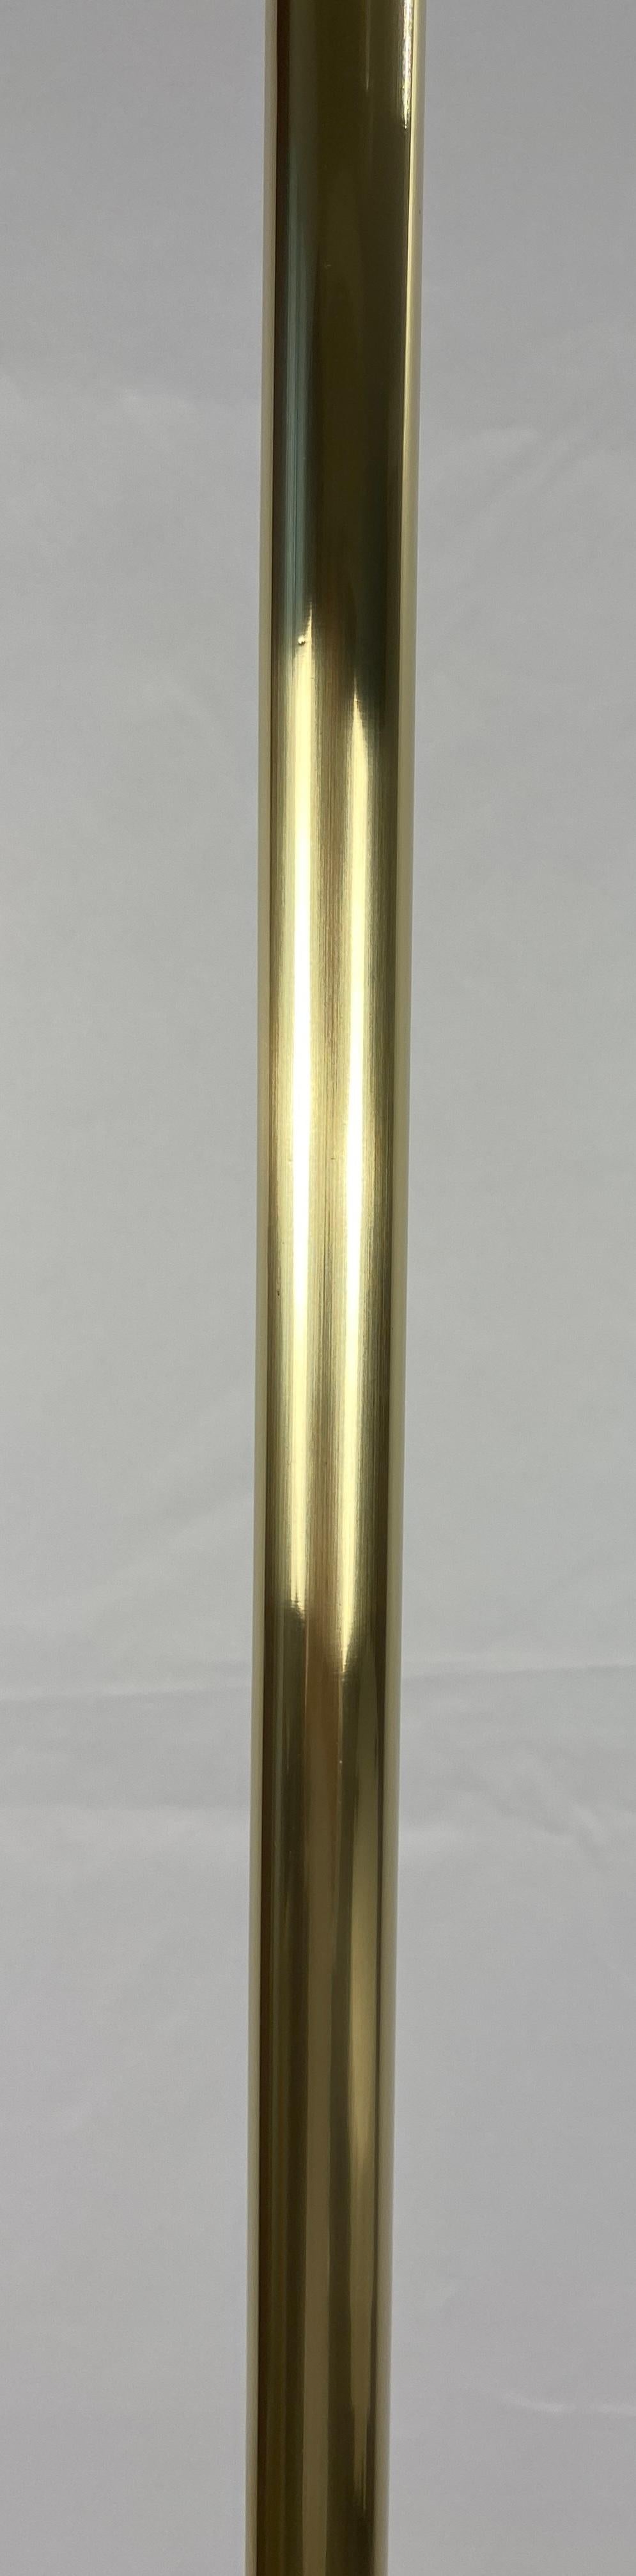 Koch & Lowy Brass Floor Lamp with Glass Shade In Good Condition For Sale In Miami, FL